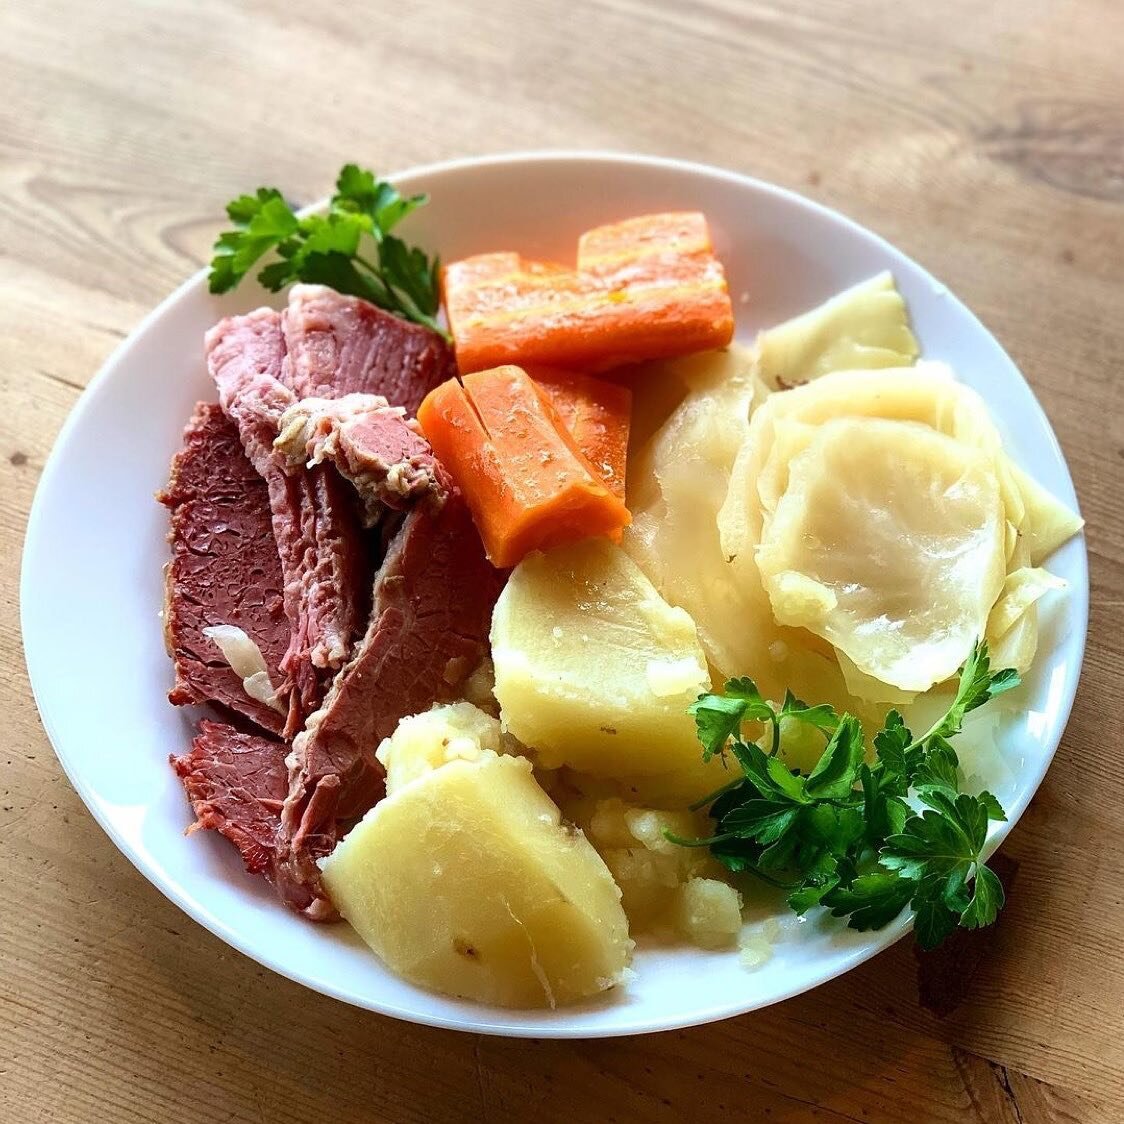 It&rsquo;s baaaackkkkk 🍀 Michele&rsquo;s corned beef and cabbage dinner is here! We&rsquo;re serving it HOT all day tomorrow! Pick up your to go meal today if you can&rsquo;t make it! 🌈 See you soon 💚 #stpatricksday #cornedbeefandcabbage #harborvi